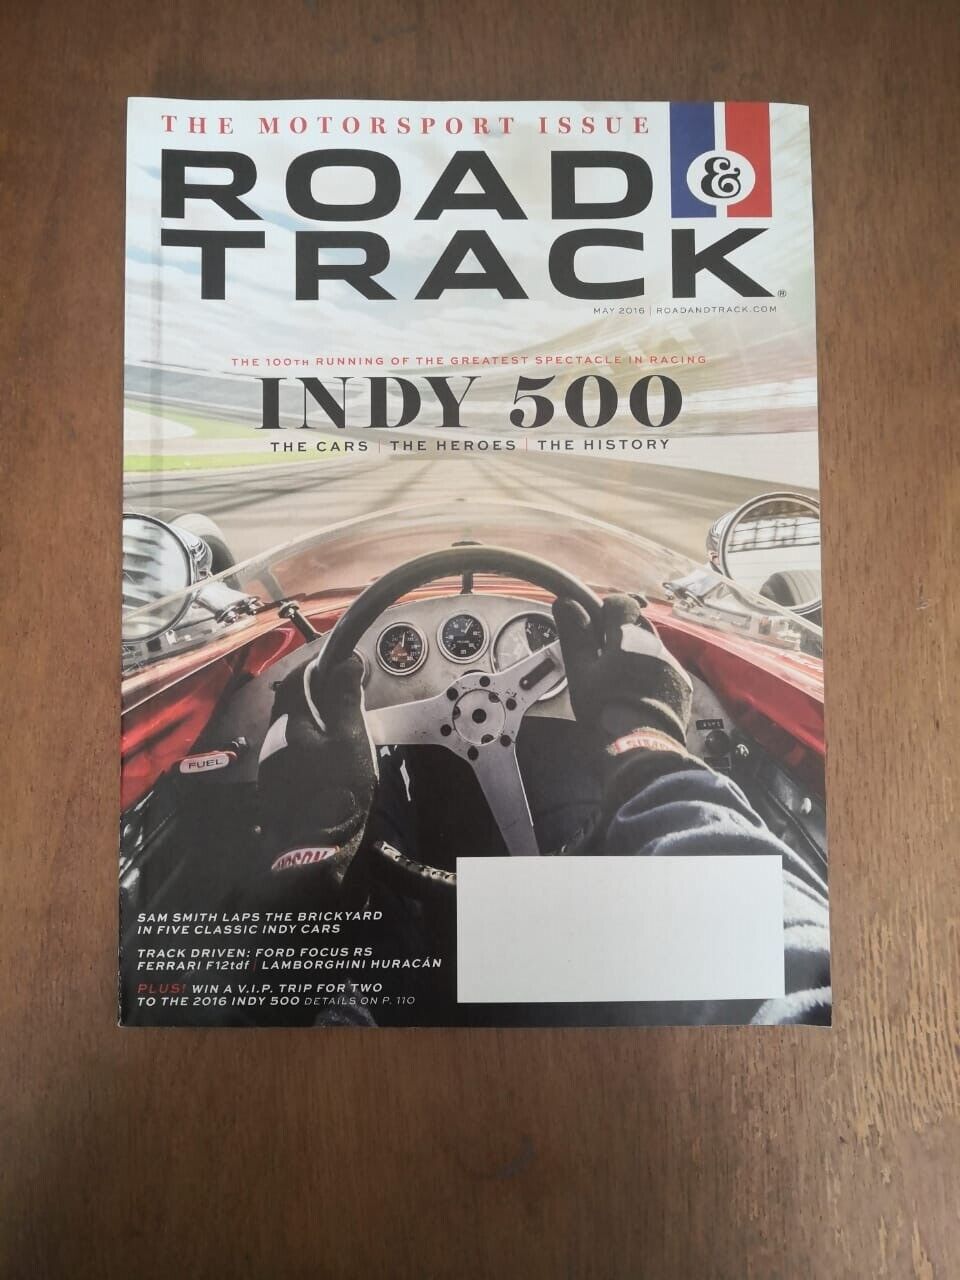 Road & Track Magazine May 2016 Motorsport Issue - History of the Indy 500 - 